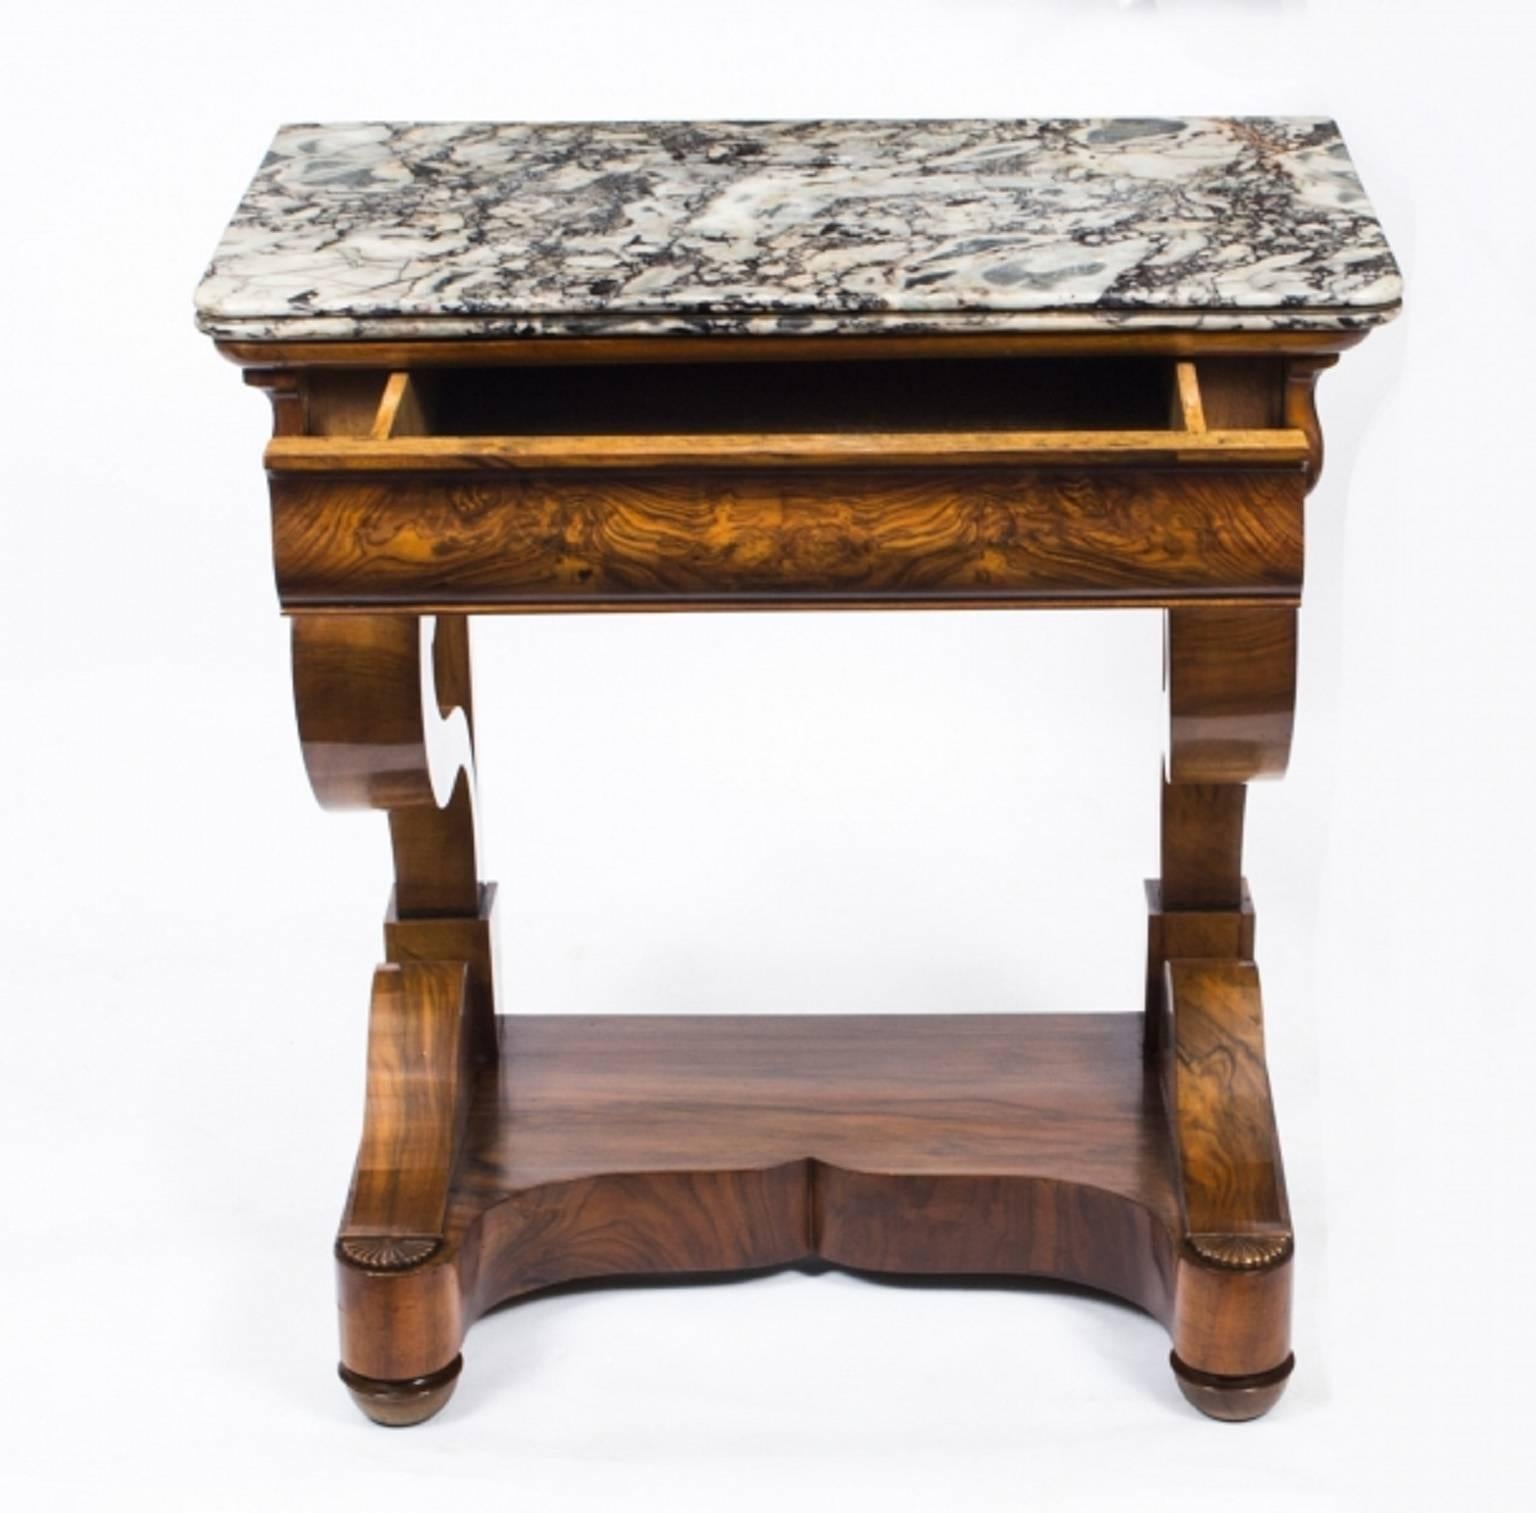 This is a very elegant and petite antique French Charles X period finely figured walnut console table, circa 1830 in date.

This beautiful console table retains its original Gris St Anne marble top has a useful frieze drawer and stands on